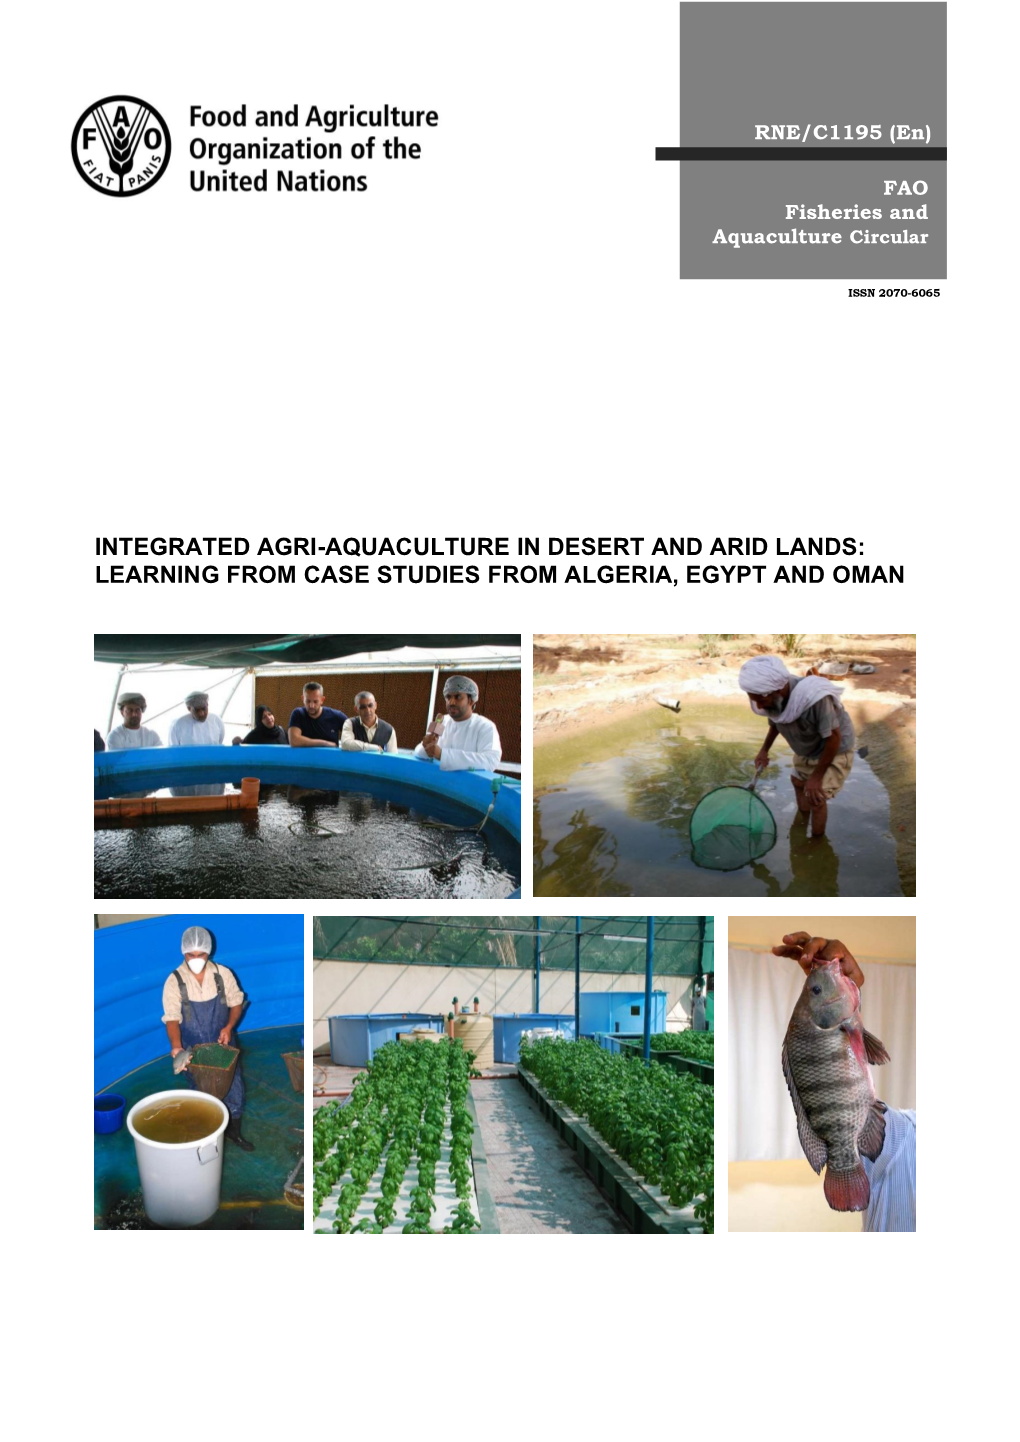 Integrated Agri-Aquaculture in Desert and Arid Lands: Learning from Case Studies from Algeria, Egypt and Oman